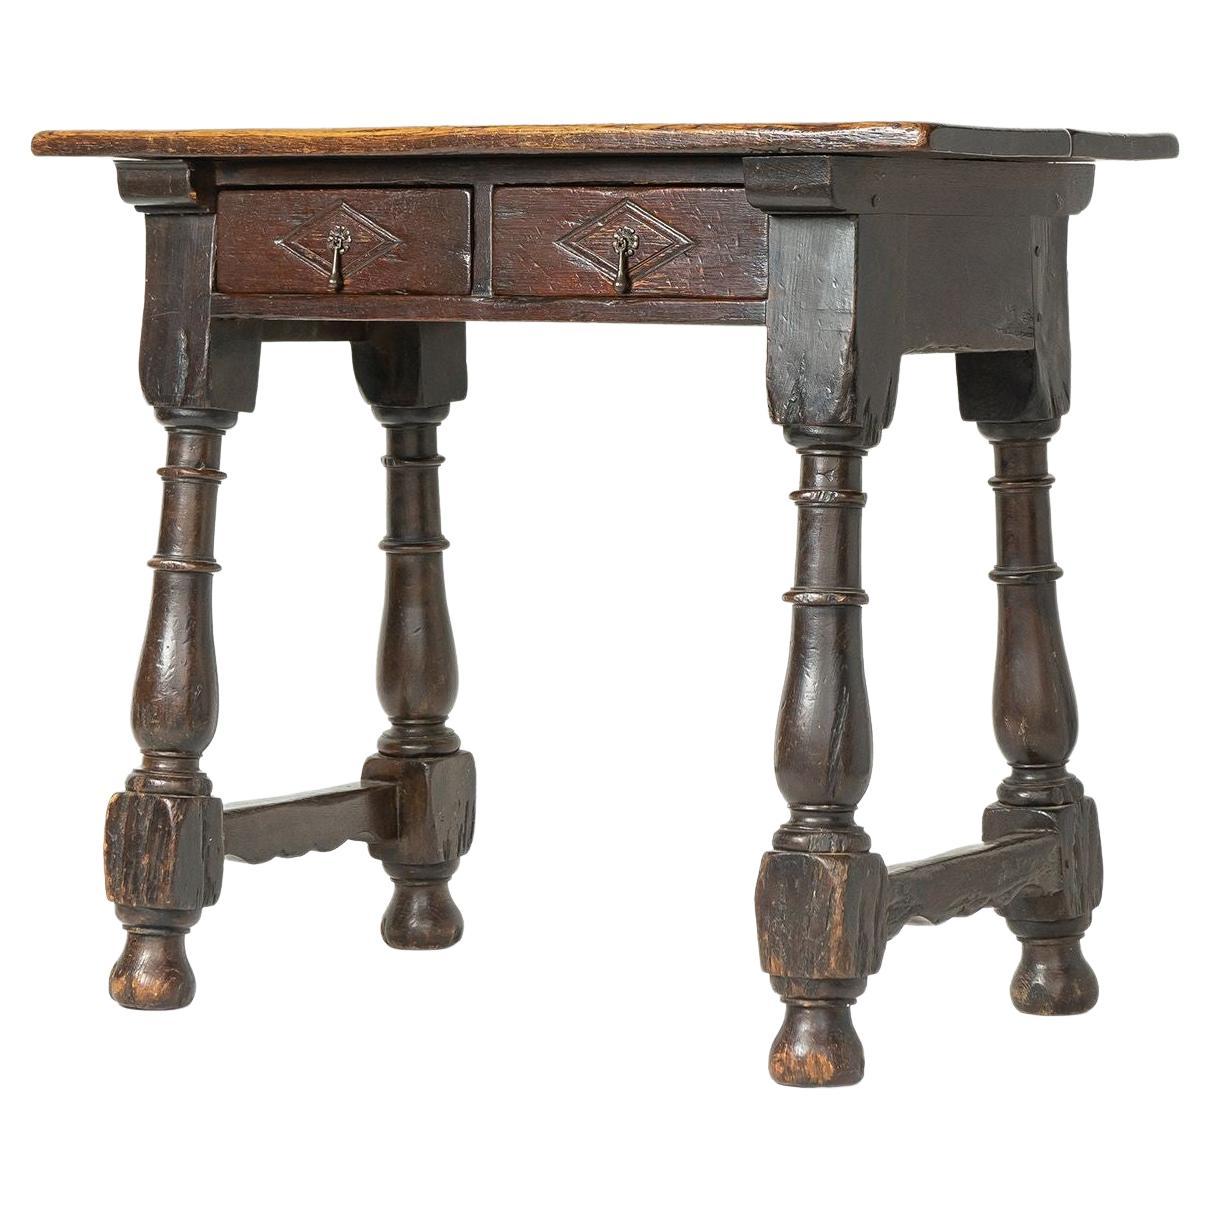 Antique Chunky Spanish Baroque Oak Side Table with Baluster Legs, 17th Century For Sale